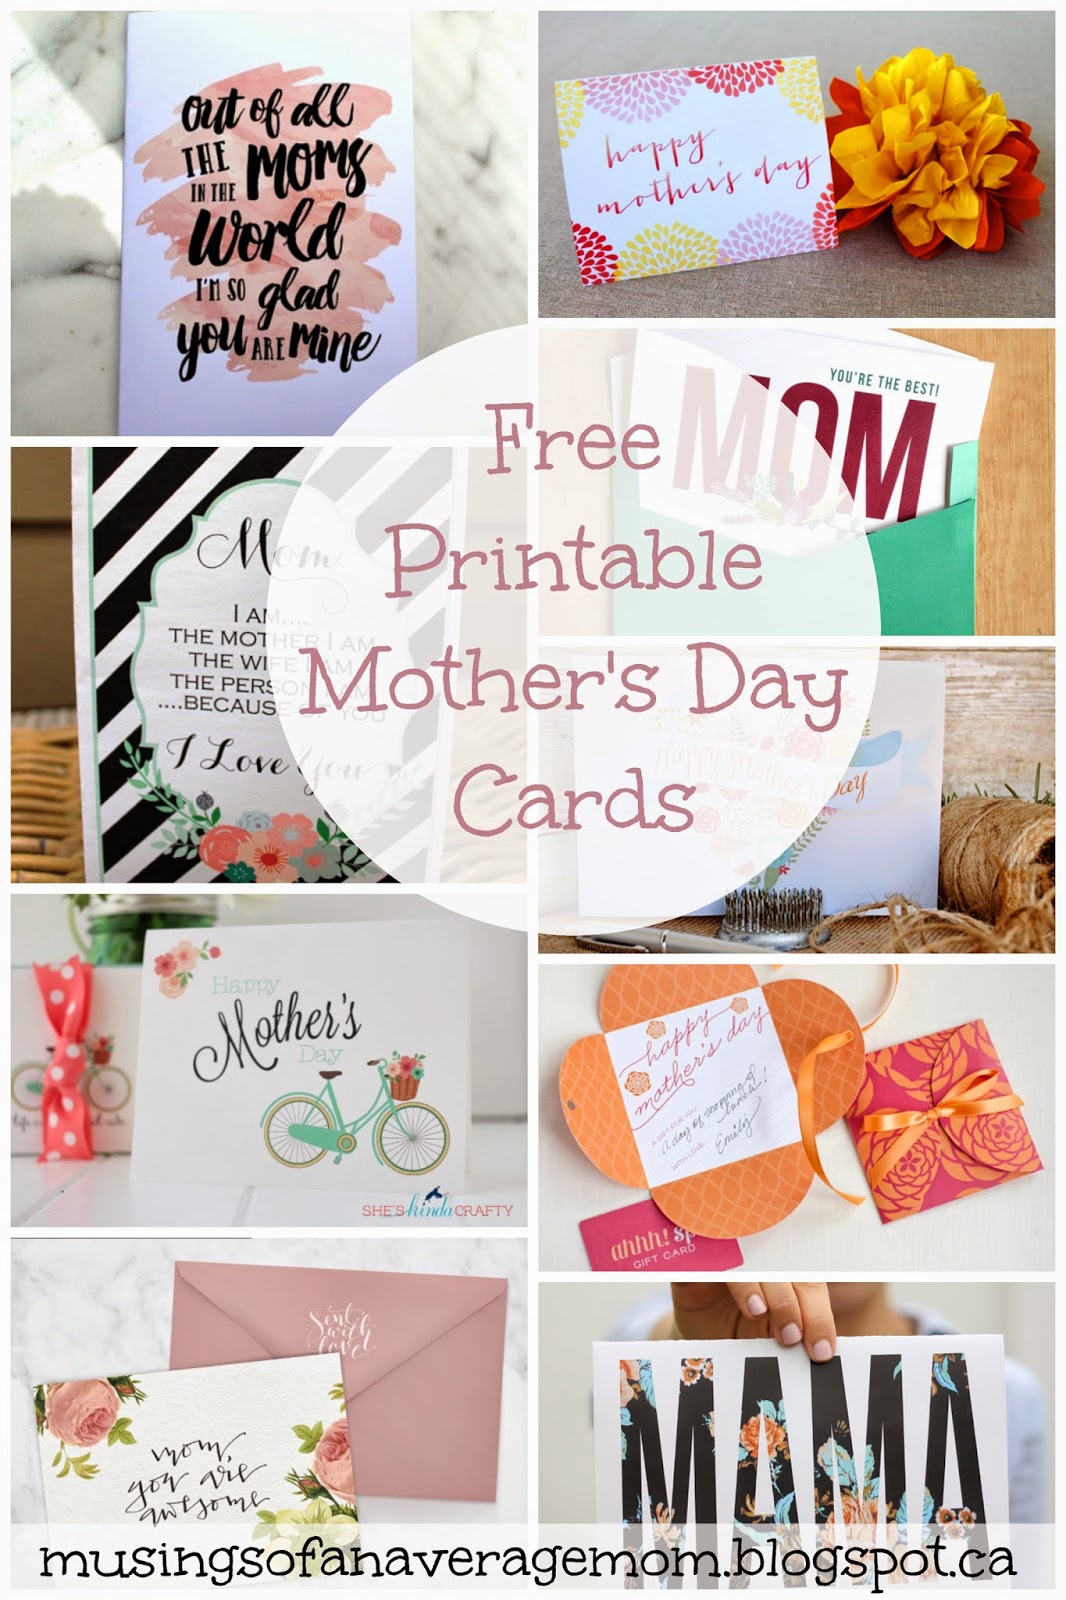 musings-of-an-average-mom-free-printable-mothers-day-cards